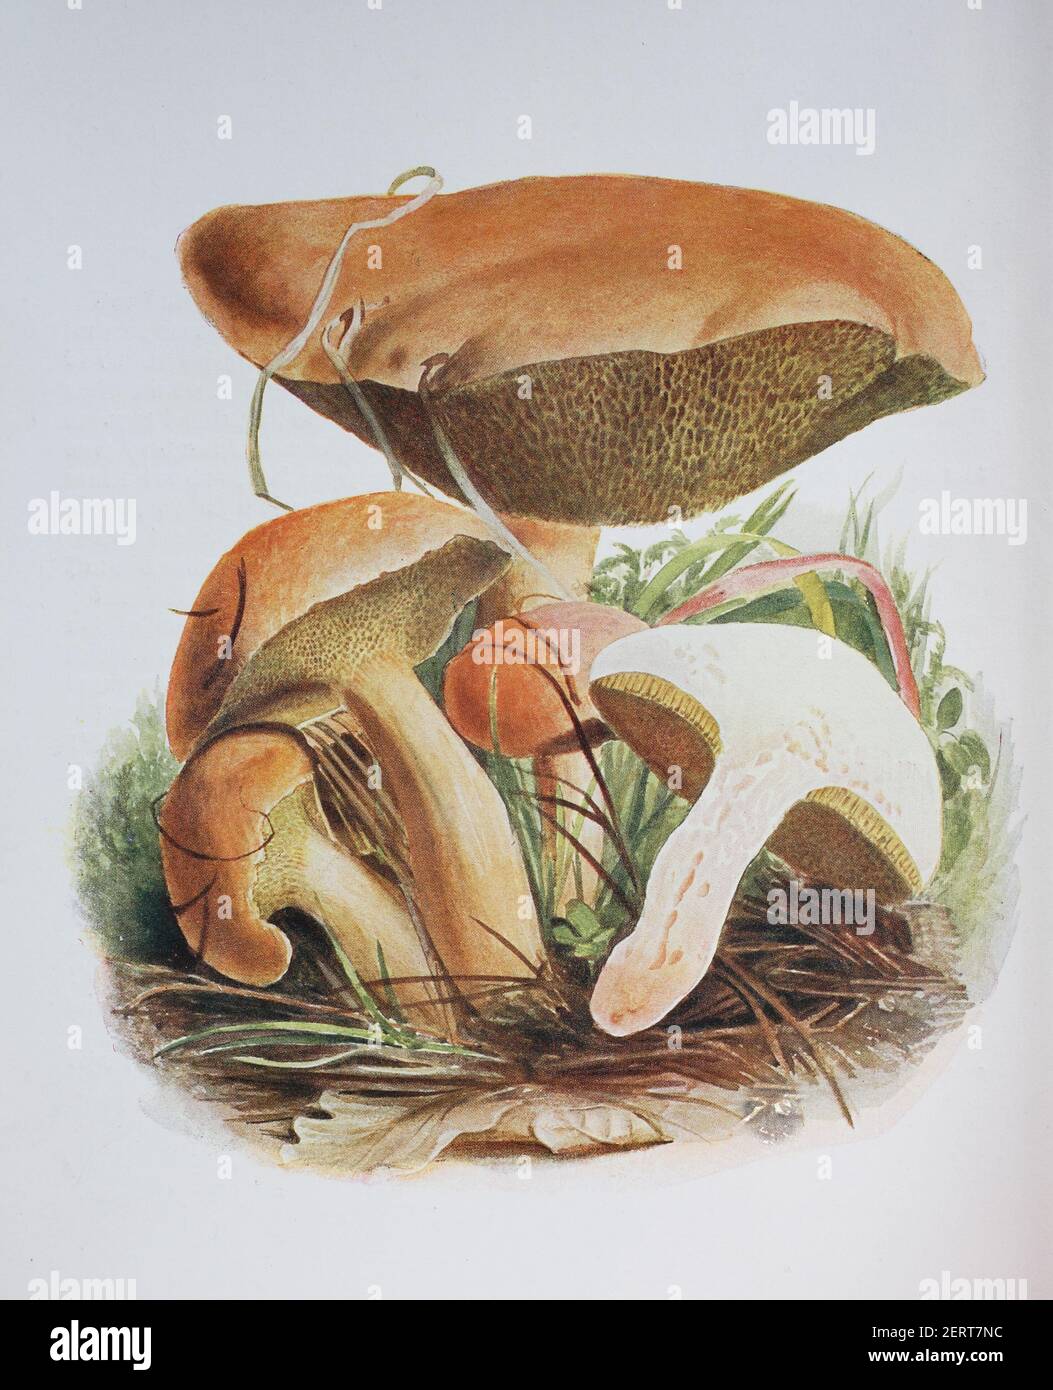 Suillus bovinus, also known as the Jersey cow mushroom or bovine bolete, is a pored mushroom of the genus Suillus in the family Suillaceae, digital reproduction of an ilustration of Emil Doerstling (1859-1940) Stock Photo